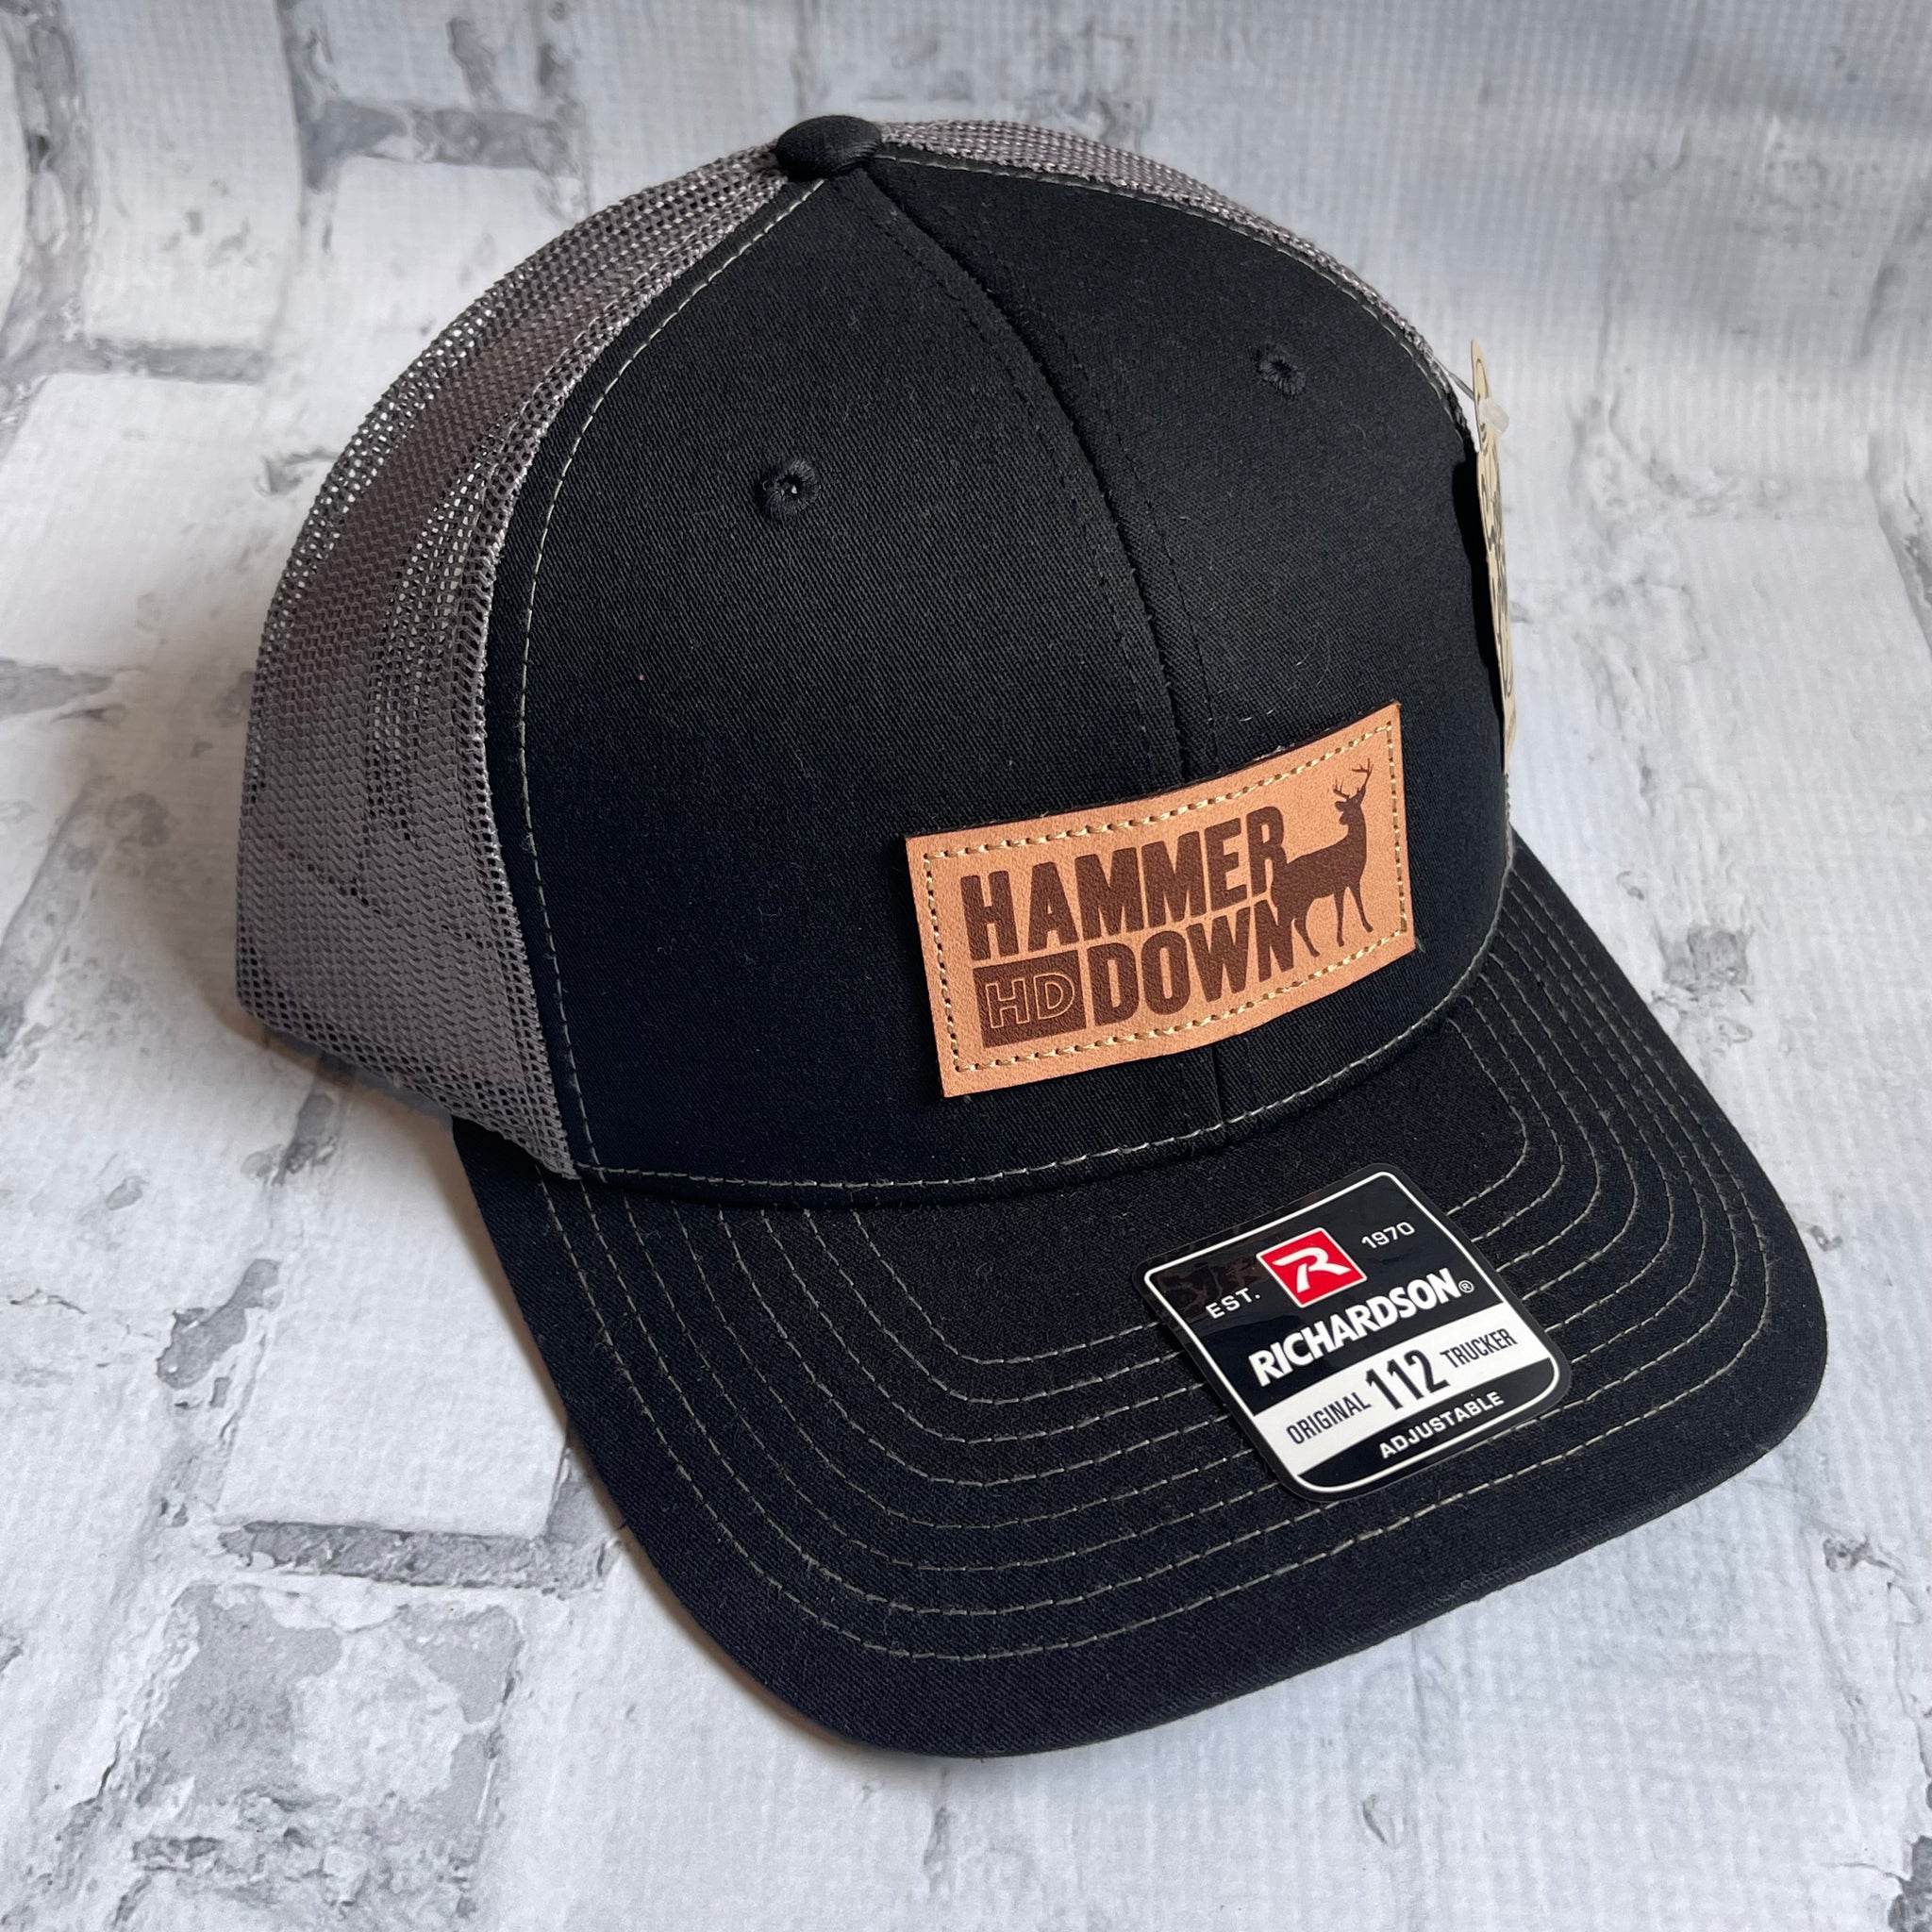 Hammer Down "Rectangle Deer" Hat - Black with Leather Patch - Southern Charm "Shop The Charm"